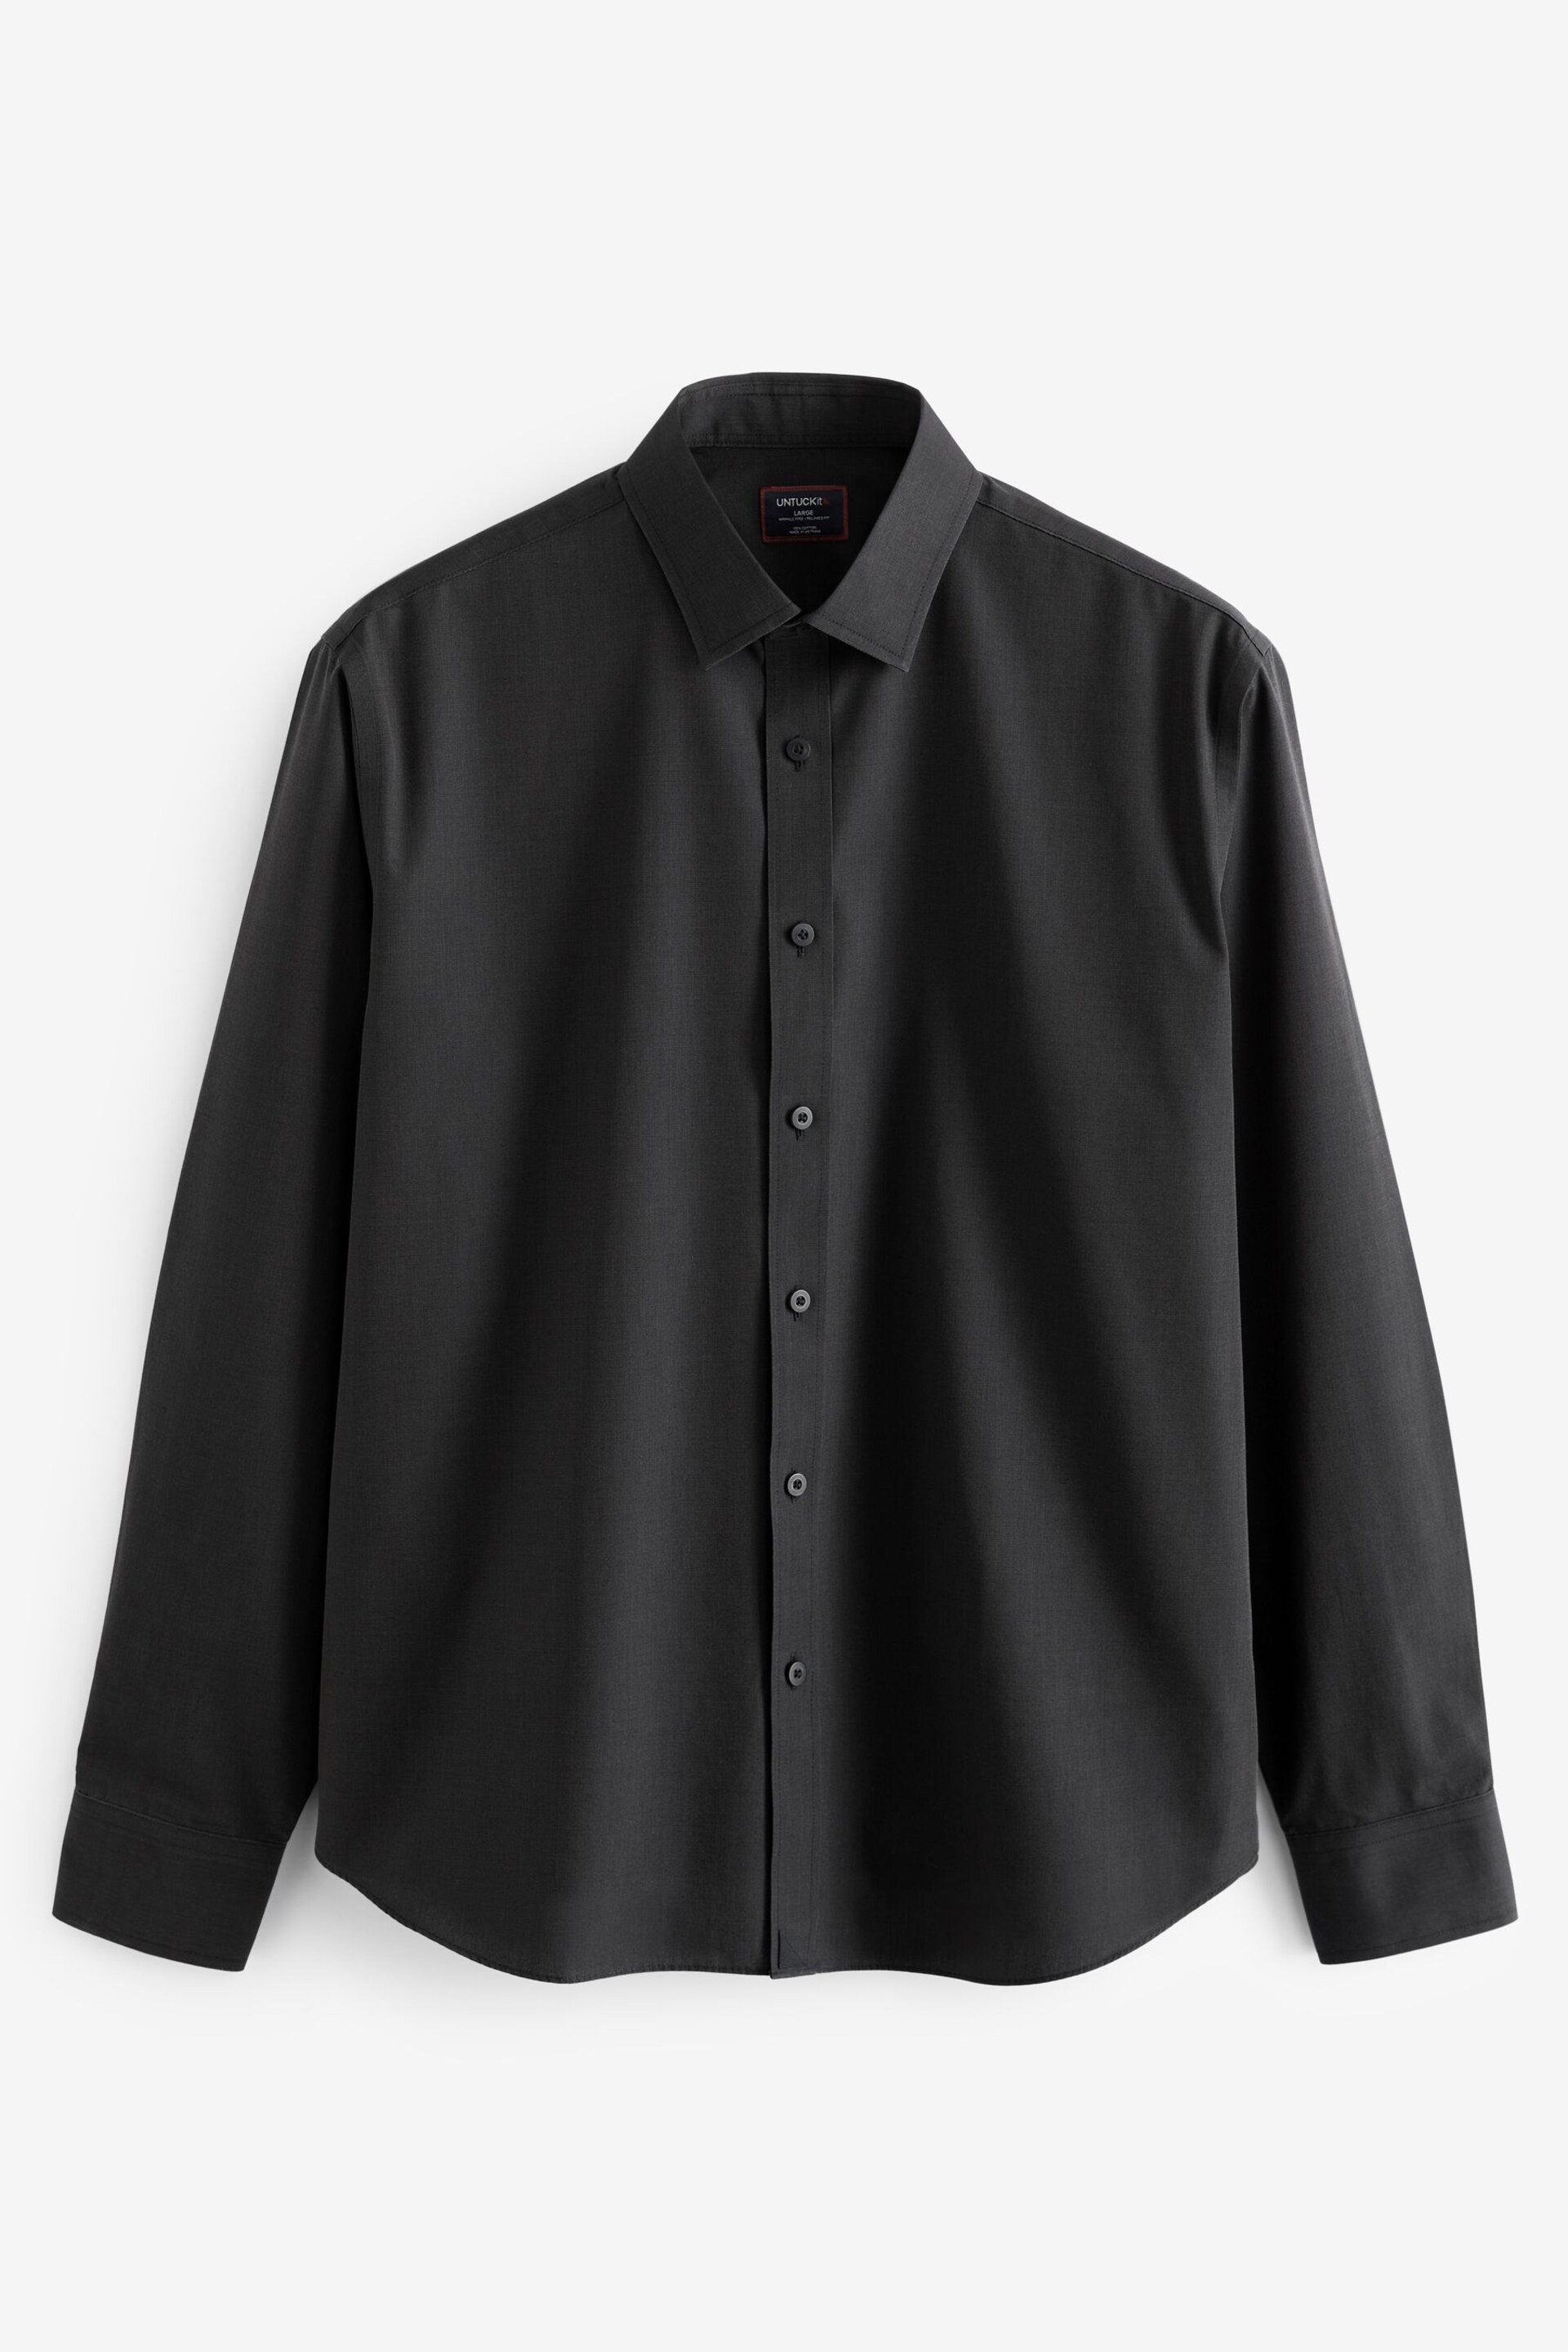 UNTUCKit Black Wrinkle-Free Relaxed Fit Black Stone Shirt - Image 5 of 6